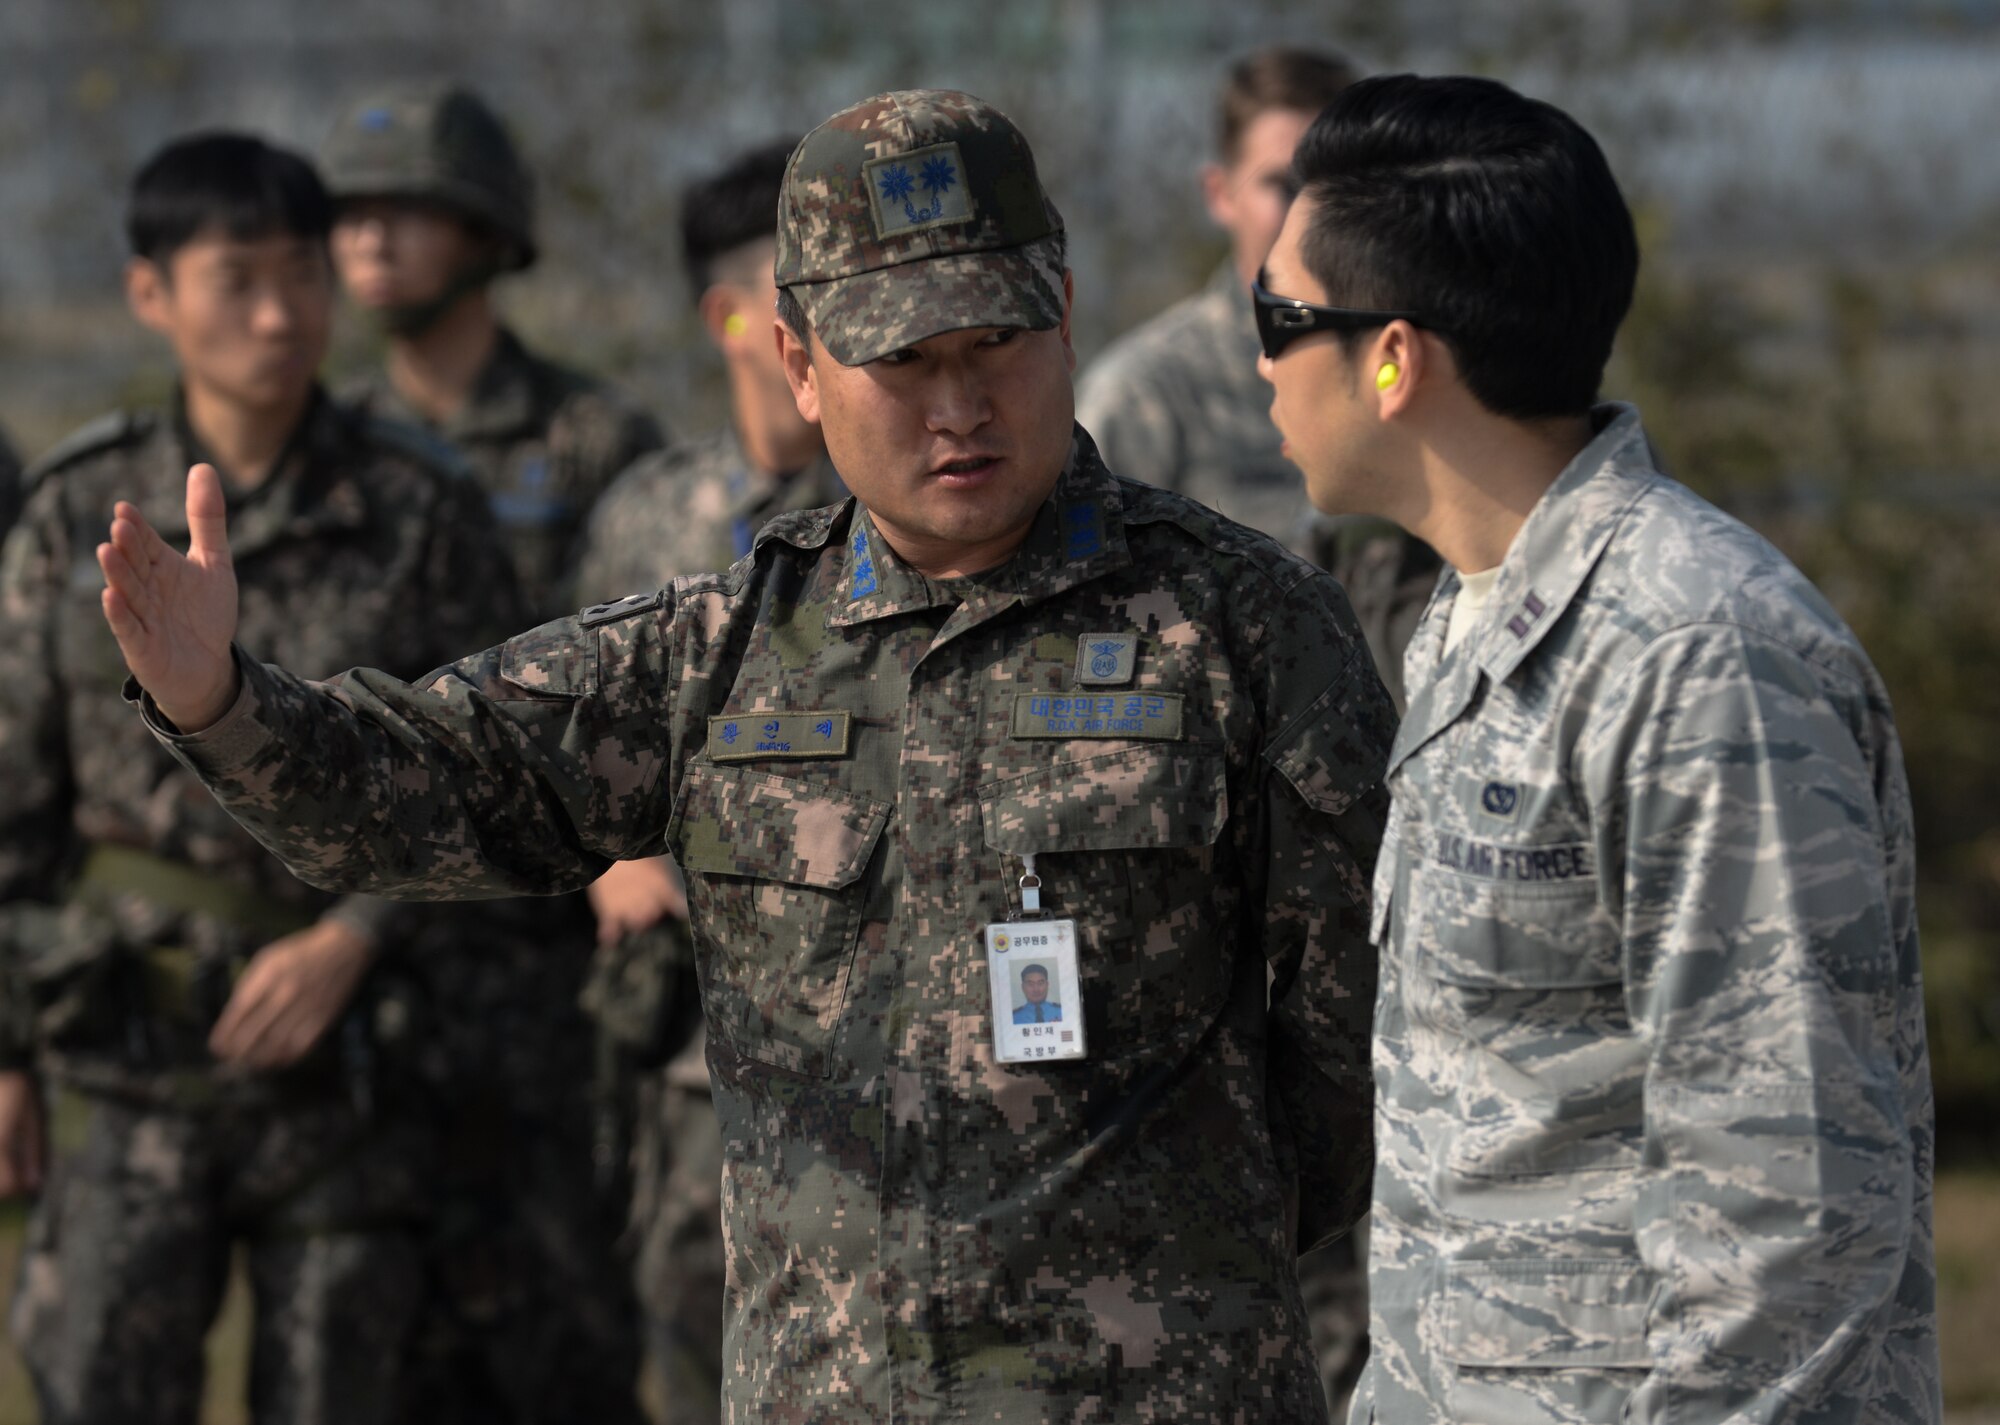 Republic of Korea Air Force Lt. Col. Injae Hwang, Air Force Operation and Command, speaks with U.S. Air Force Capt. Christopher Paek, 7th Air Force during a Rapid Airfield Damage Repair bilateral training exercise at Gwangju Air Base, R.O.K., Nov. 8, 2017. U.S. and R.O.K. Airmen trained together for a week to learn the new RADR process, preparing them for response to wartime contingencies, enhancing interoperability and building partnership capacity in the Indo-Asia Pacific region. (U.S. Air Force photo by Senior Airman Curt Beach)